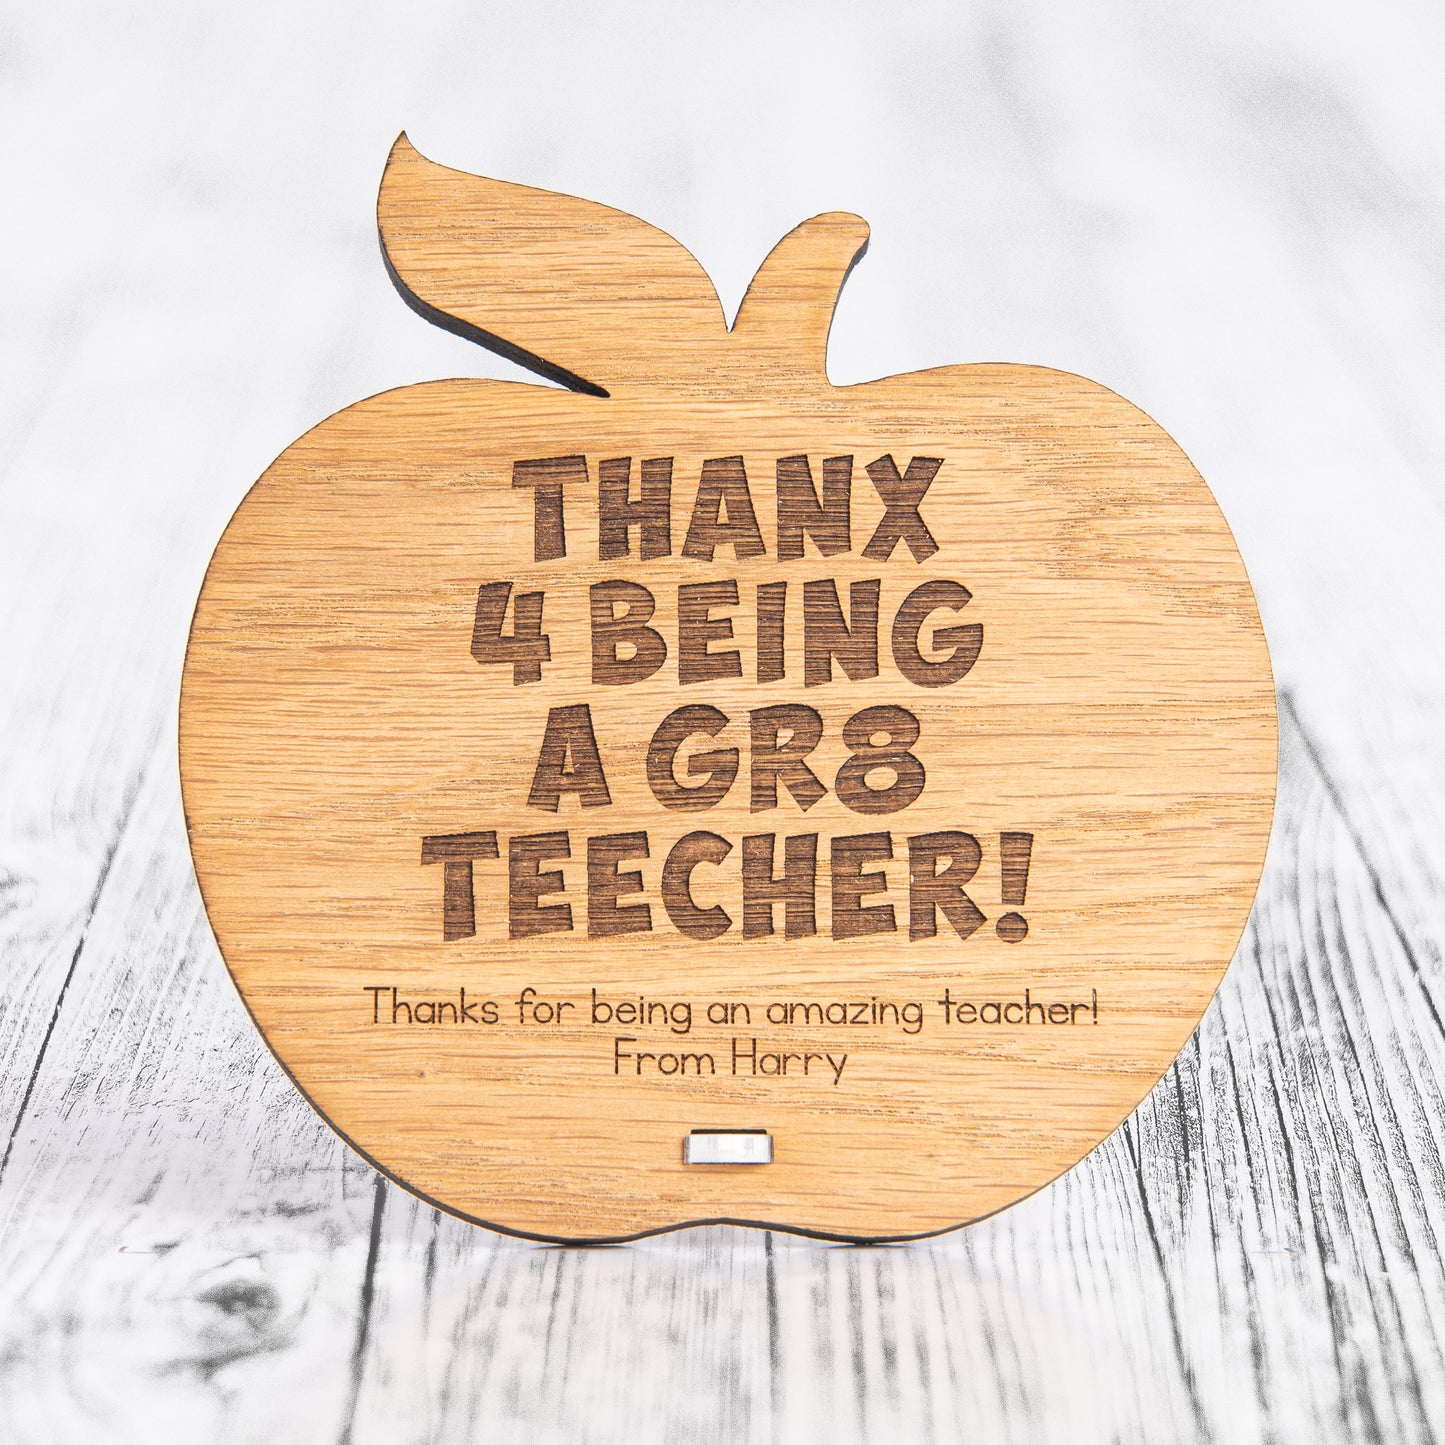 Funny Thank You Gift for Teacher - Personalised Spelling Mistake Sign - Humorous Apple Plaque